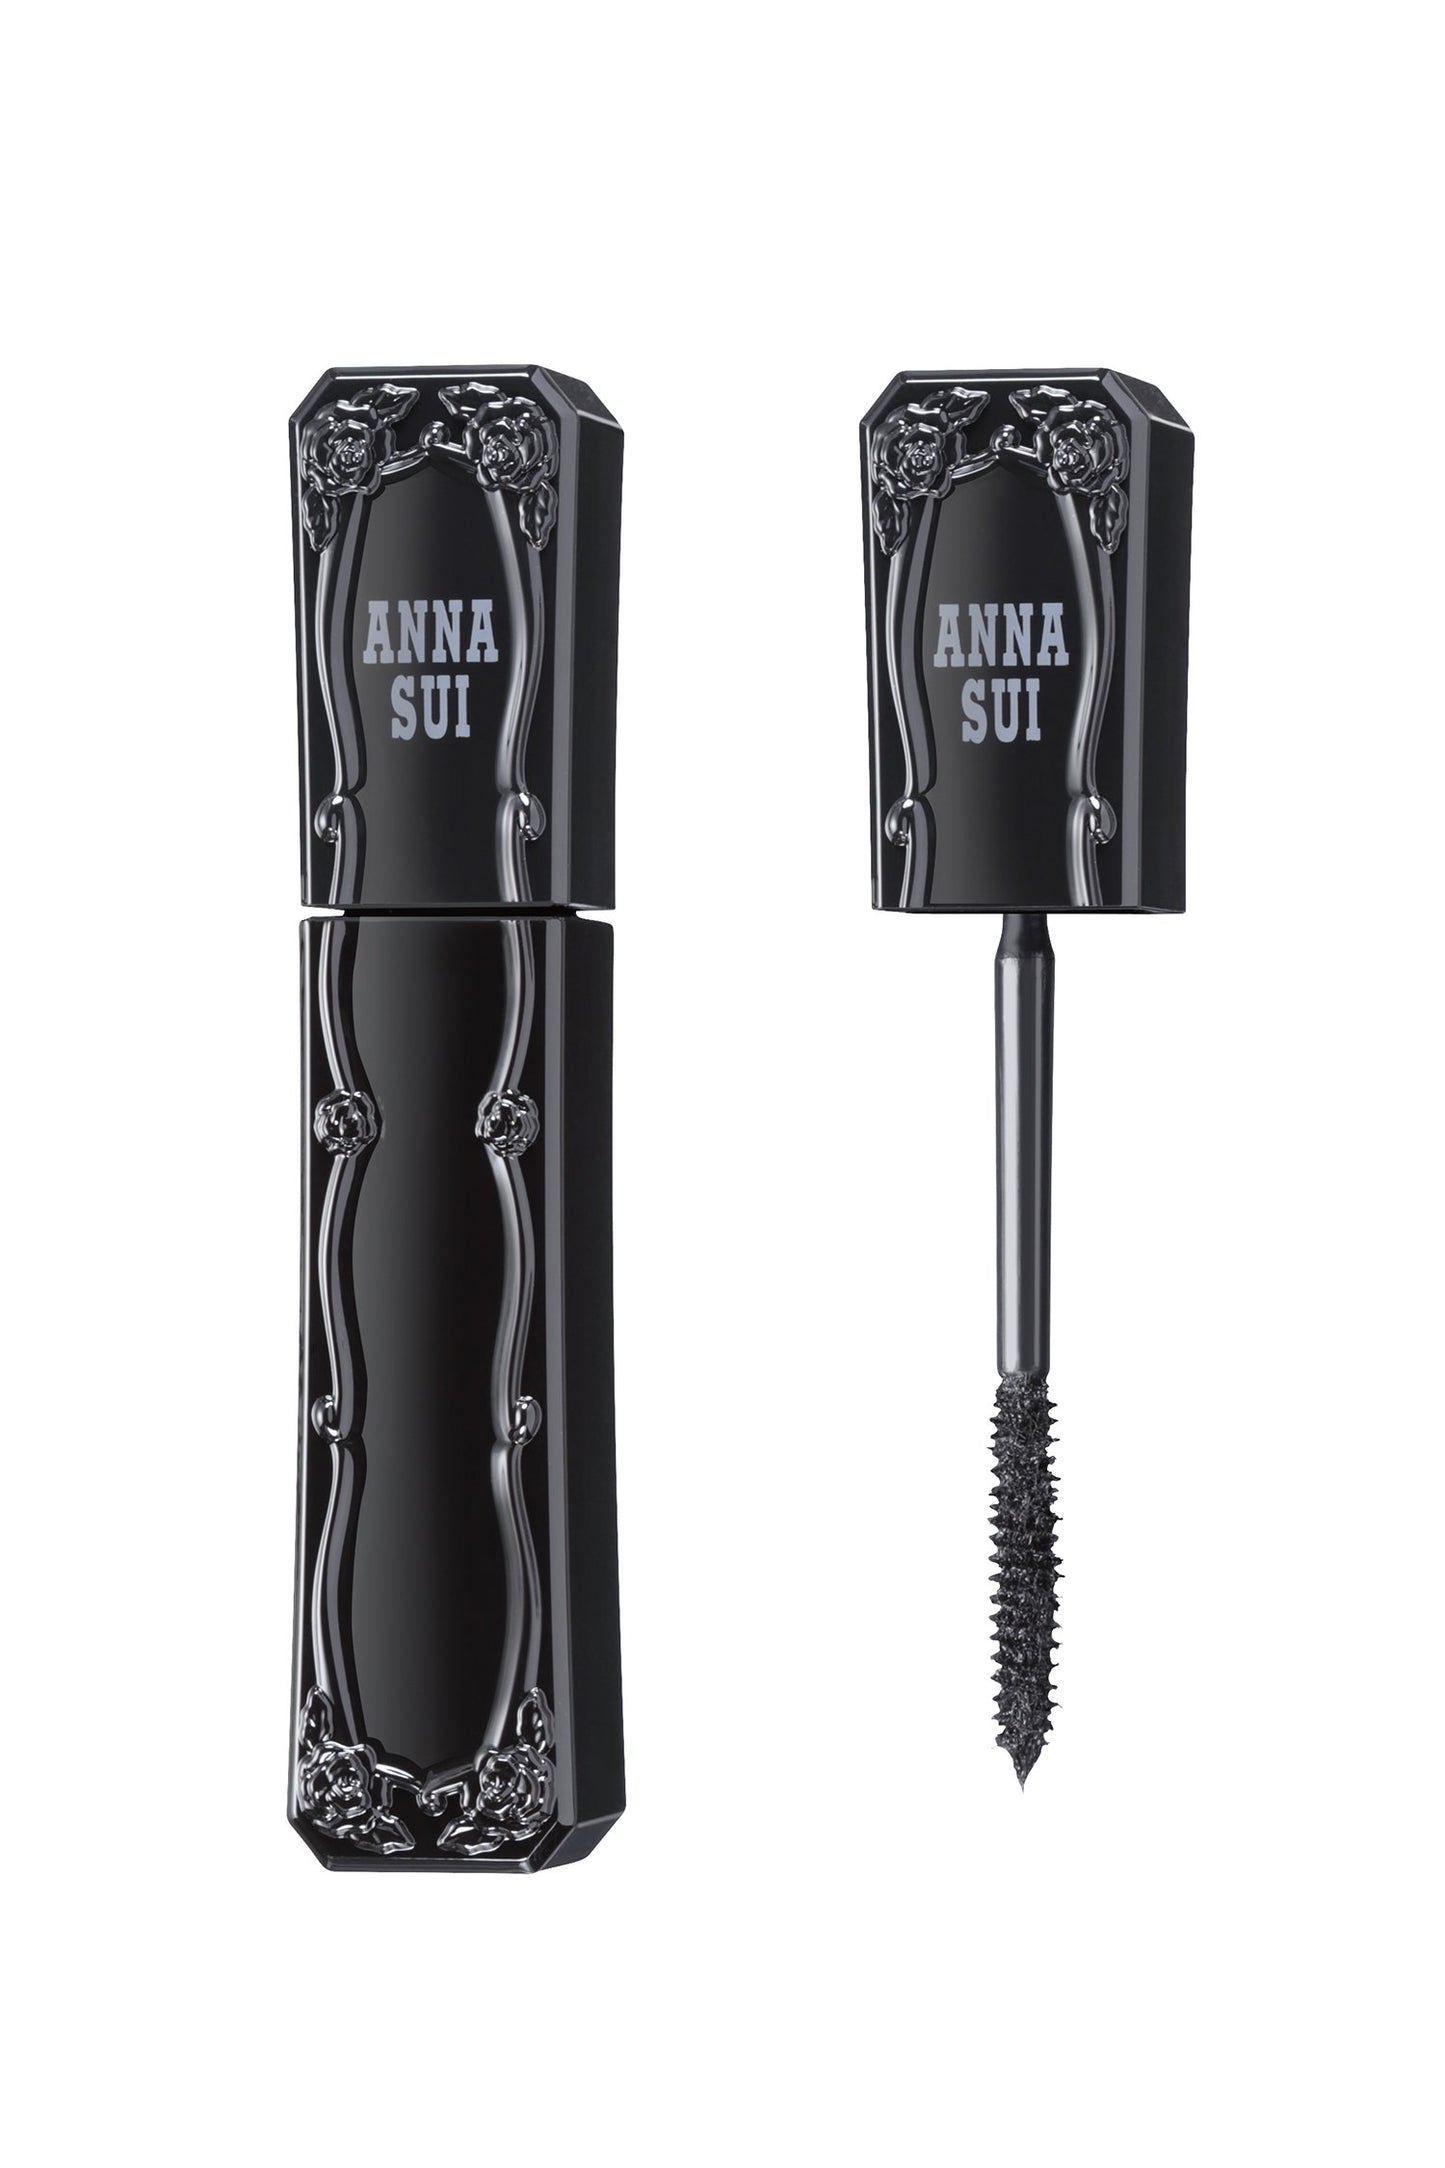 Inspired by Anna Sui fragrance bottle, black container with raised rose pattern, Anna Sui in white.